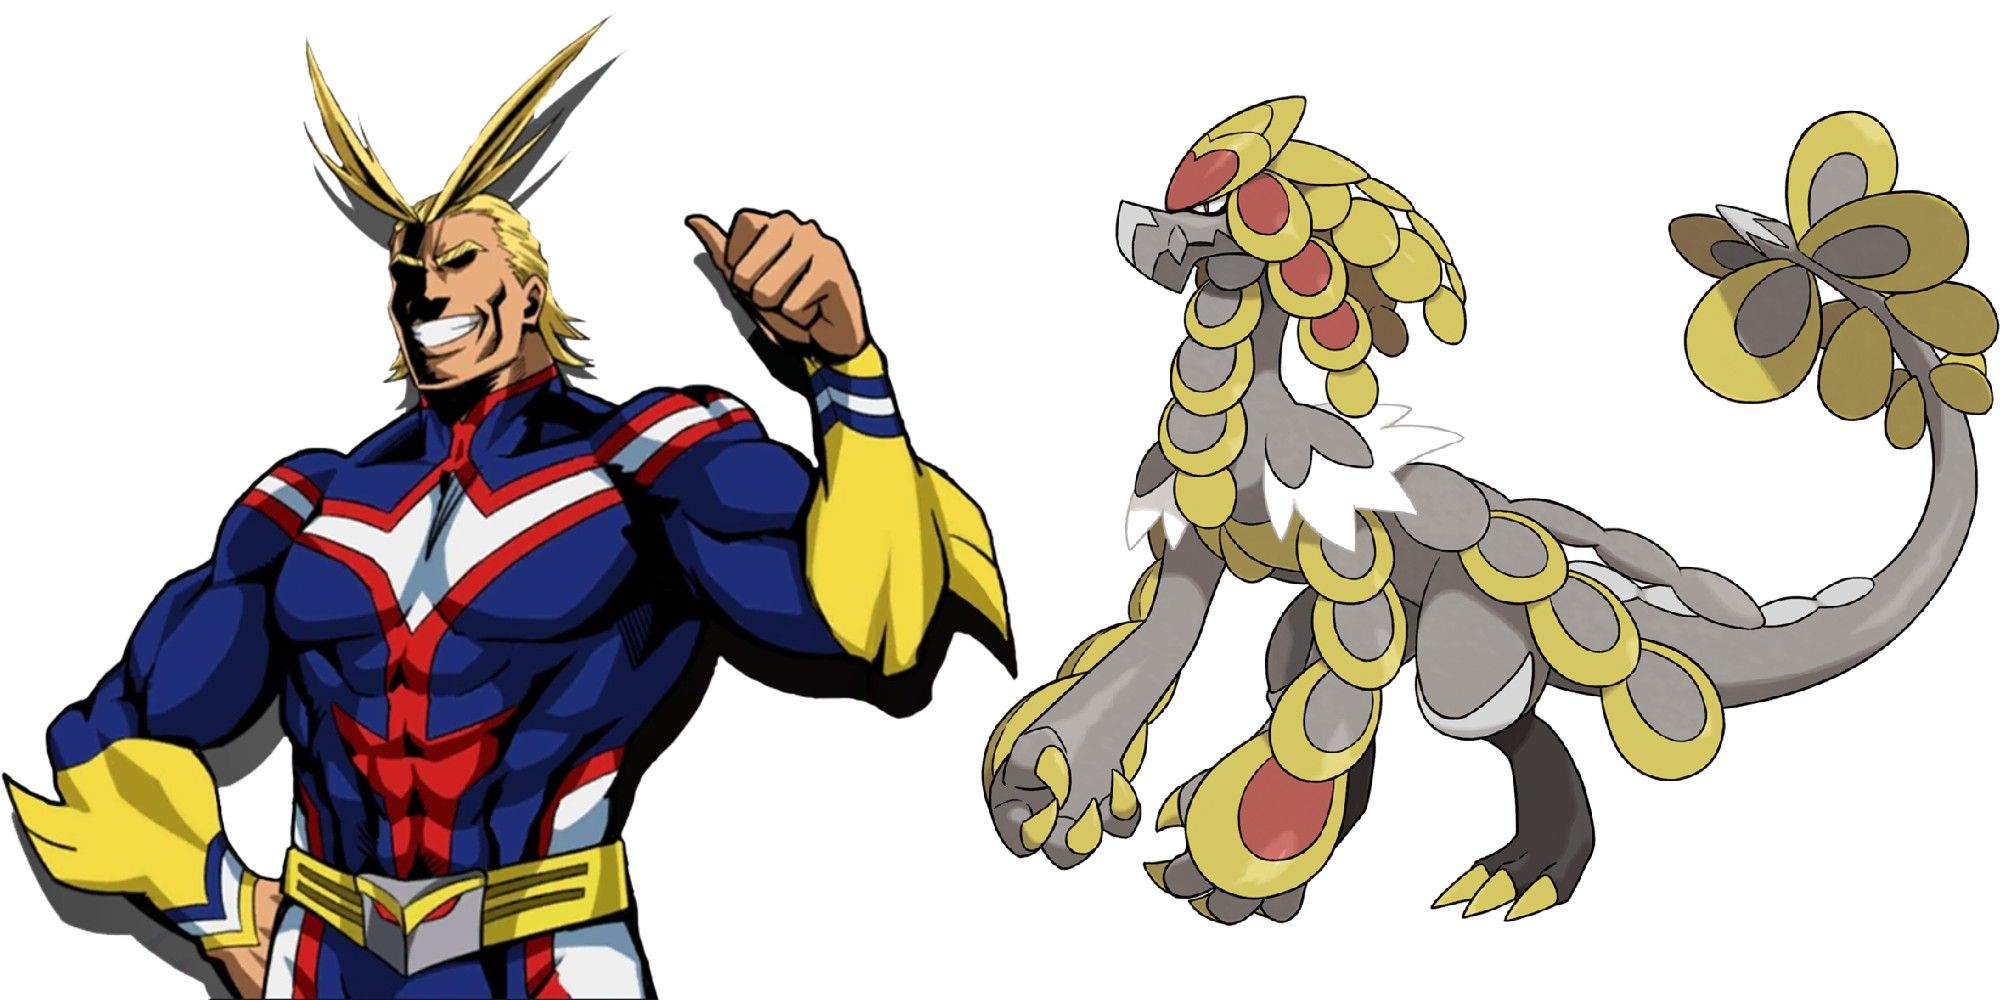 Pokemon: All Might Teams Up With Kommo-o